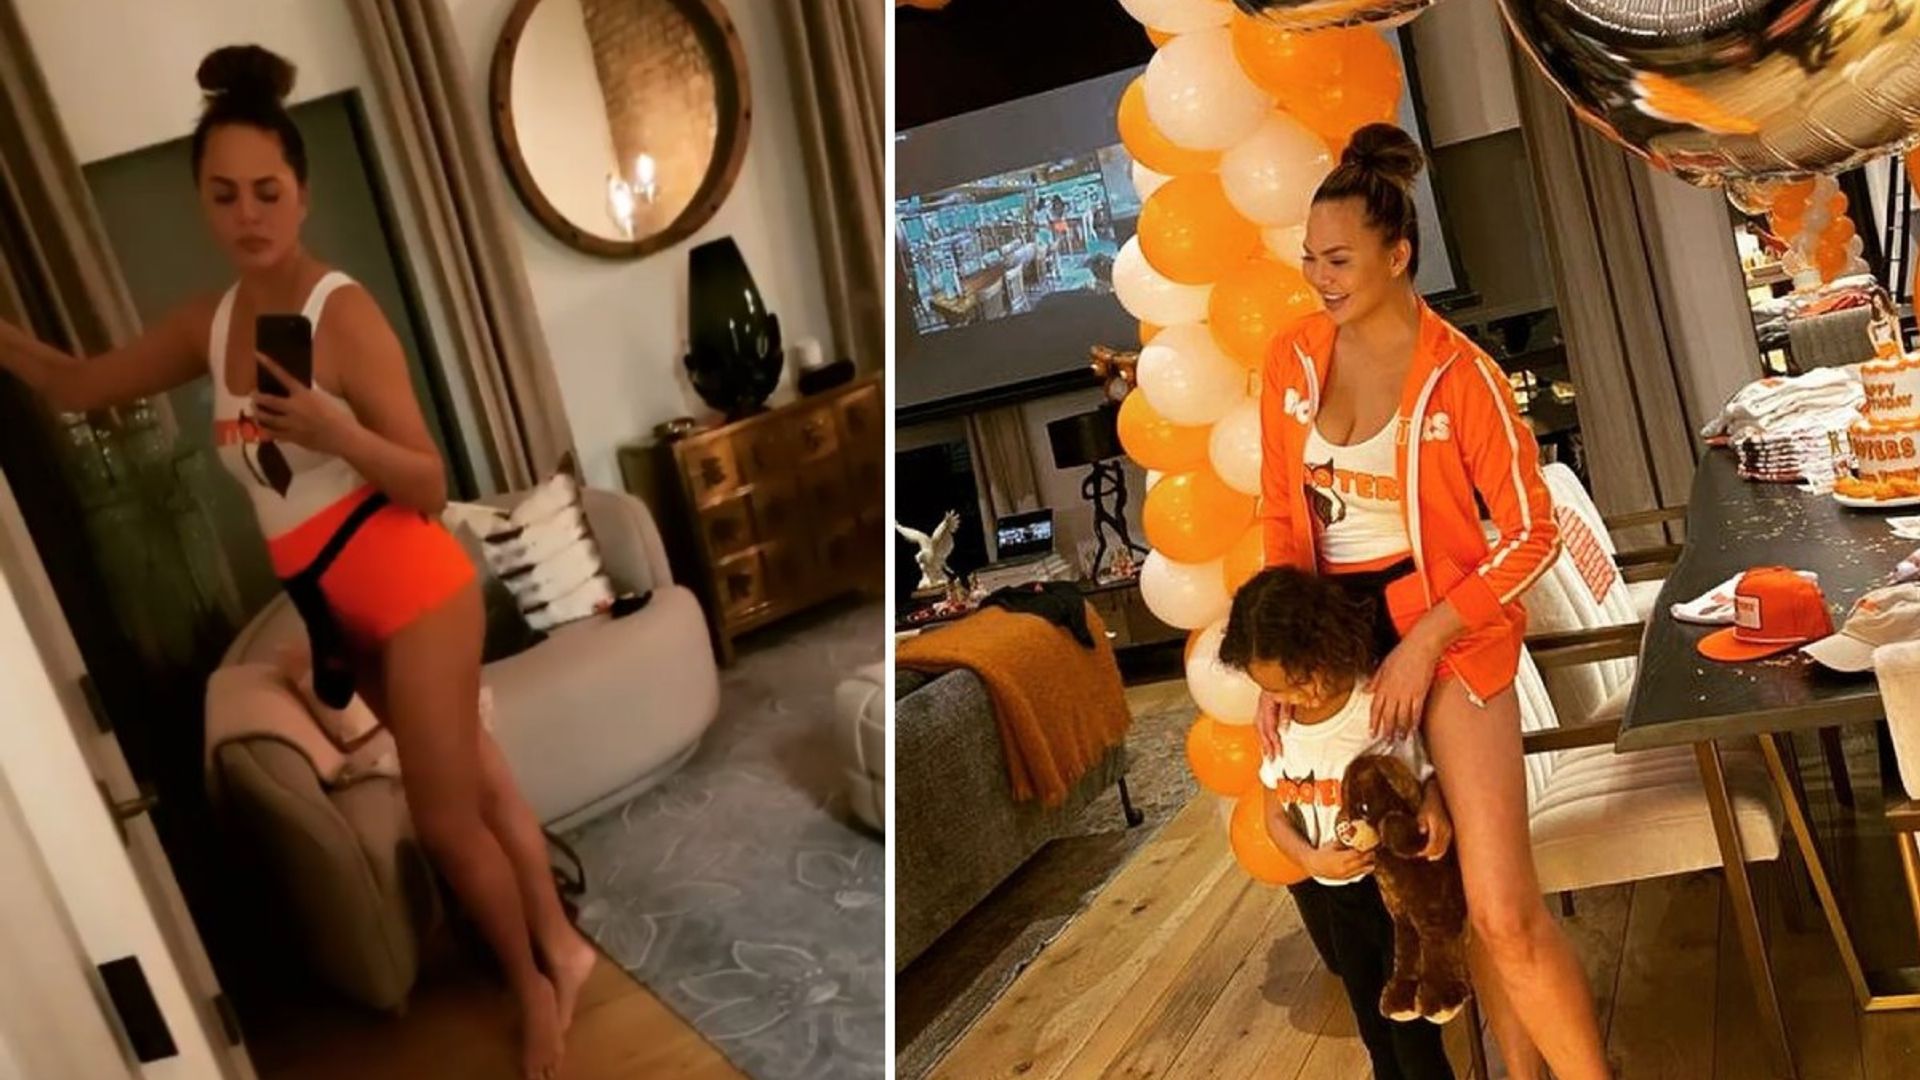 Chrissy Teigen shares amazing Hooters-themed party - and fits into old uniform